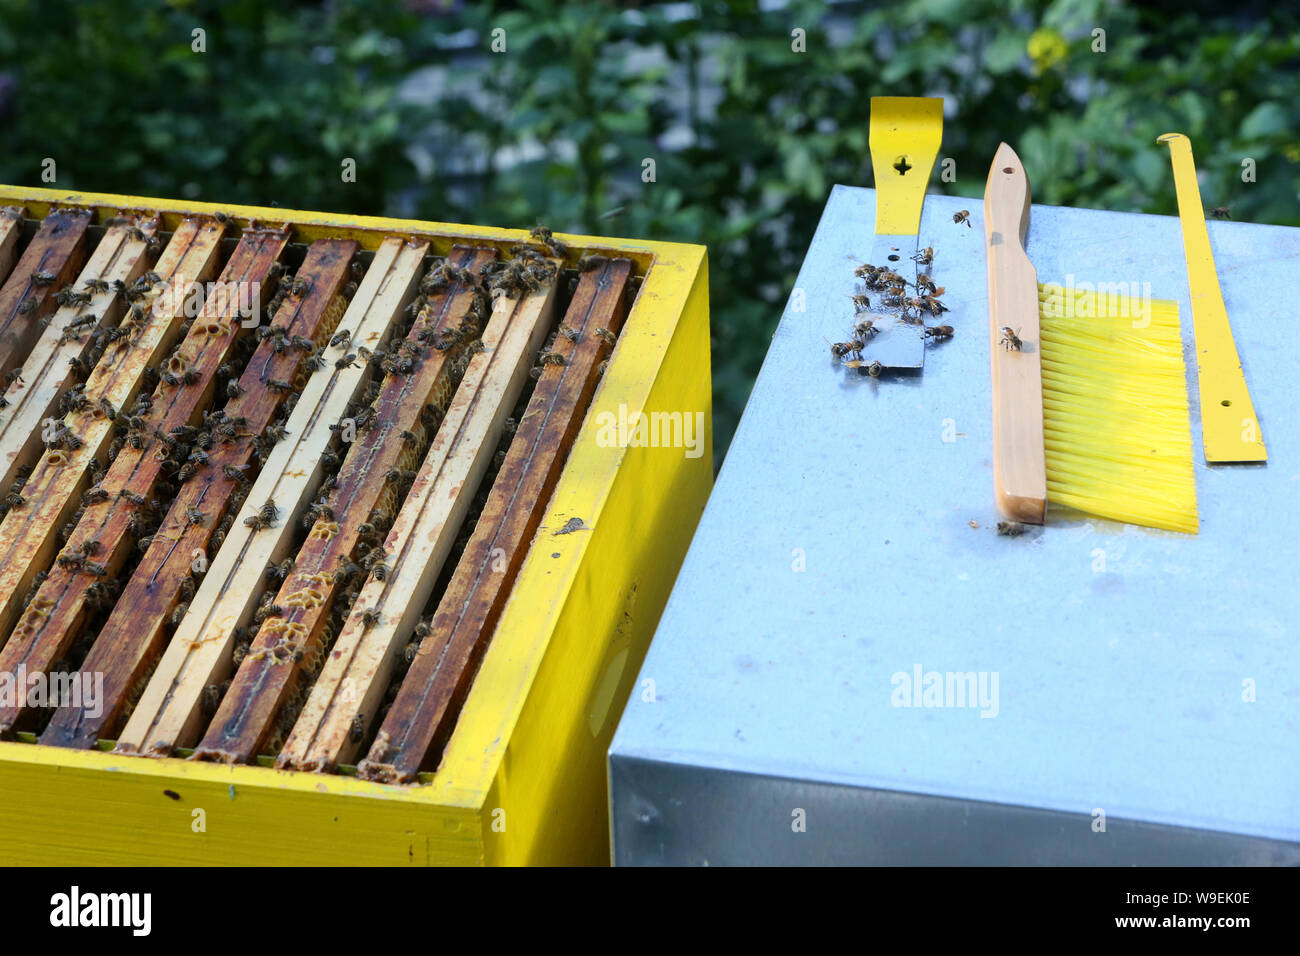 Apiculture. / Beekeeping. Stock Photo